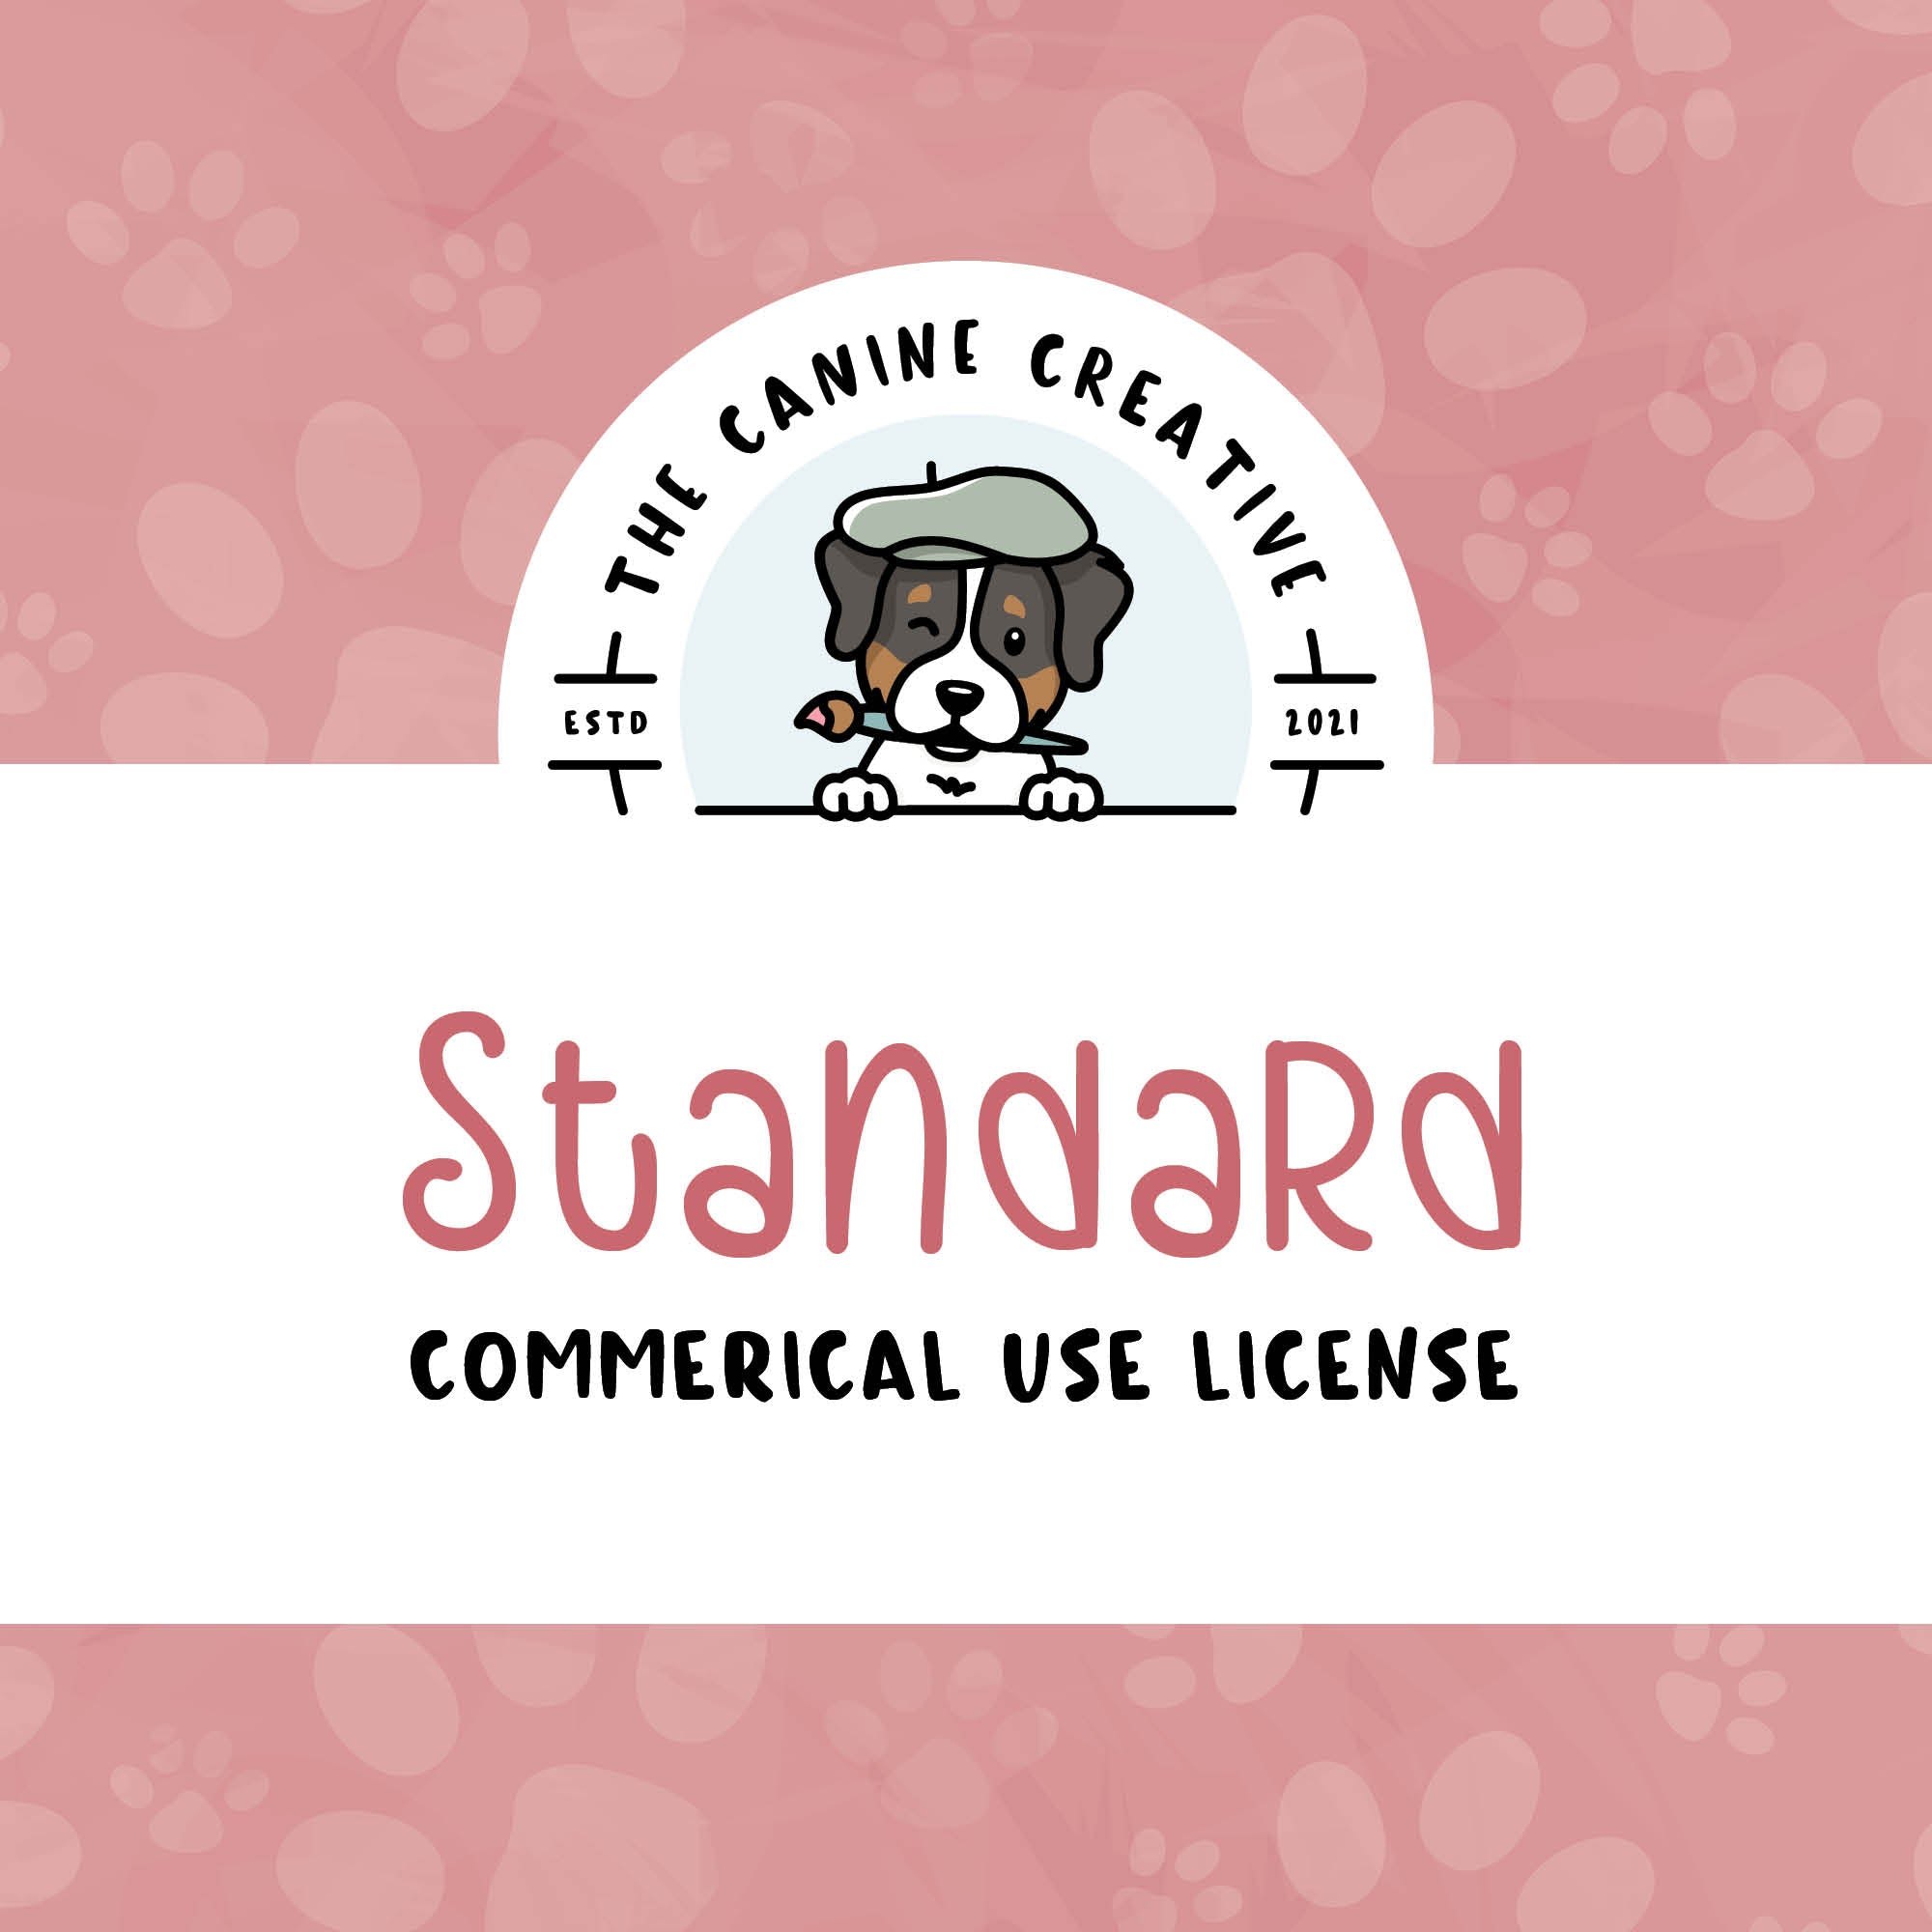 Standard Commercial Use License